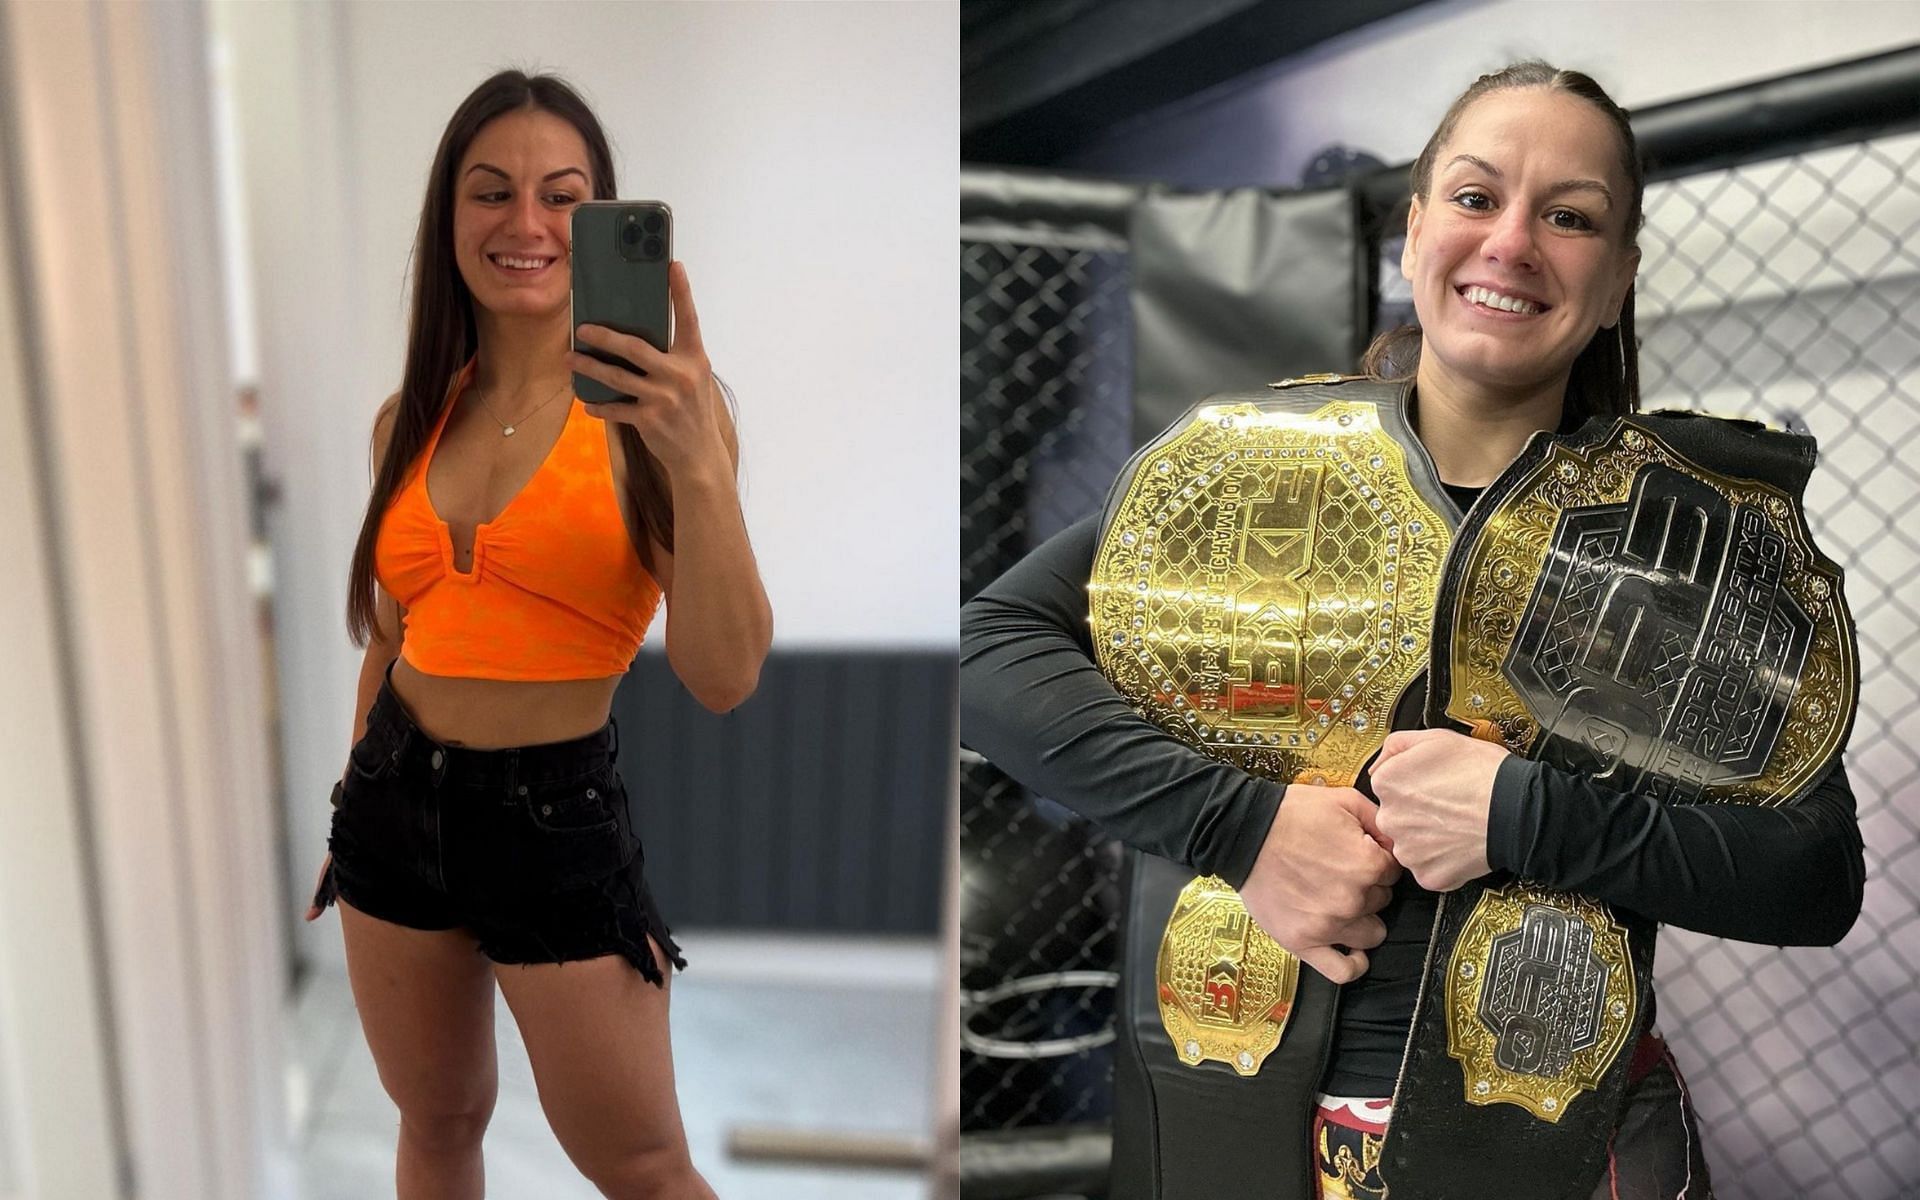 Alice Ardelean [Left] Ardelean with her belts [Right] [Images courtesy: @aliceardelean (Instagram)]